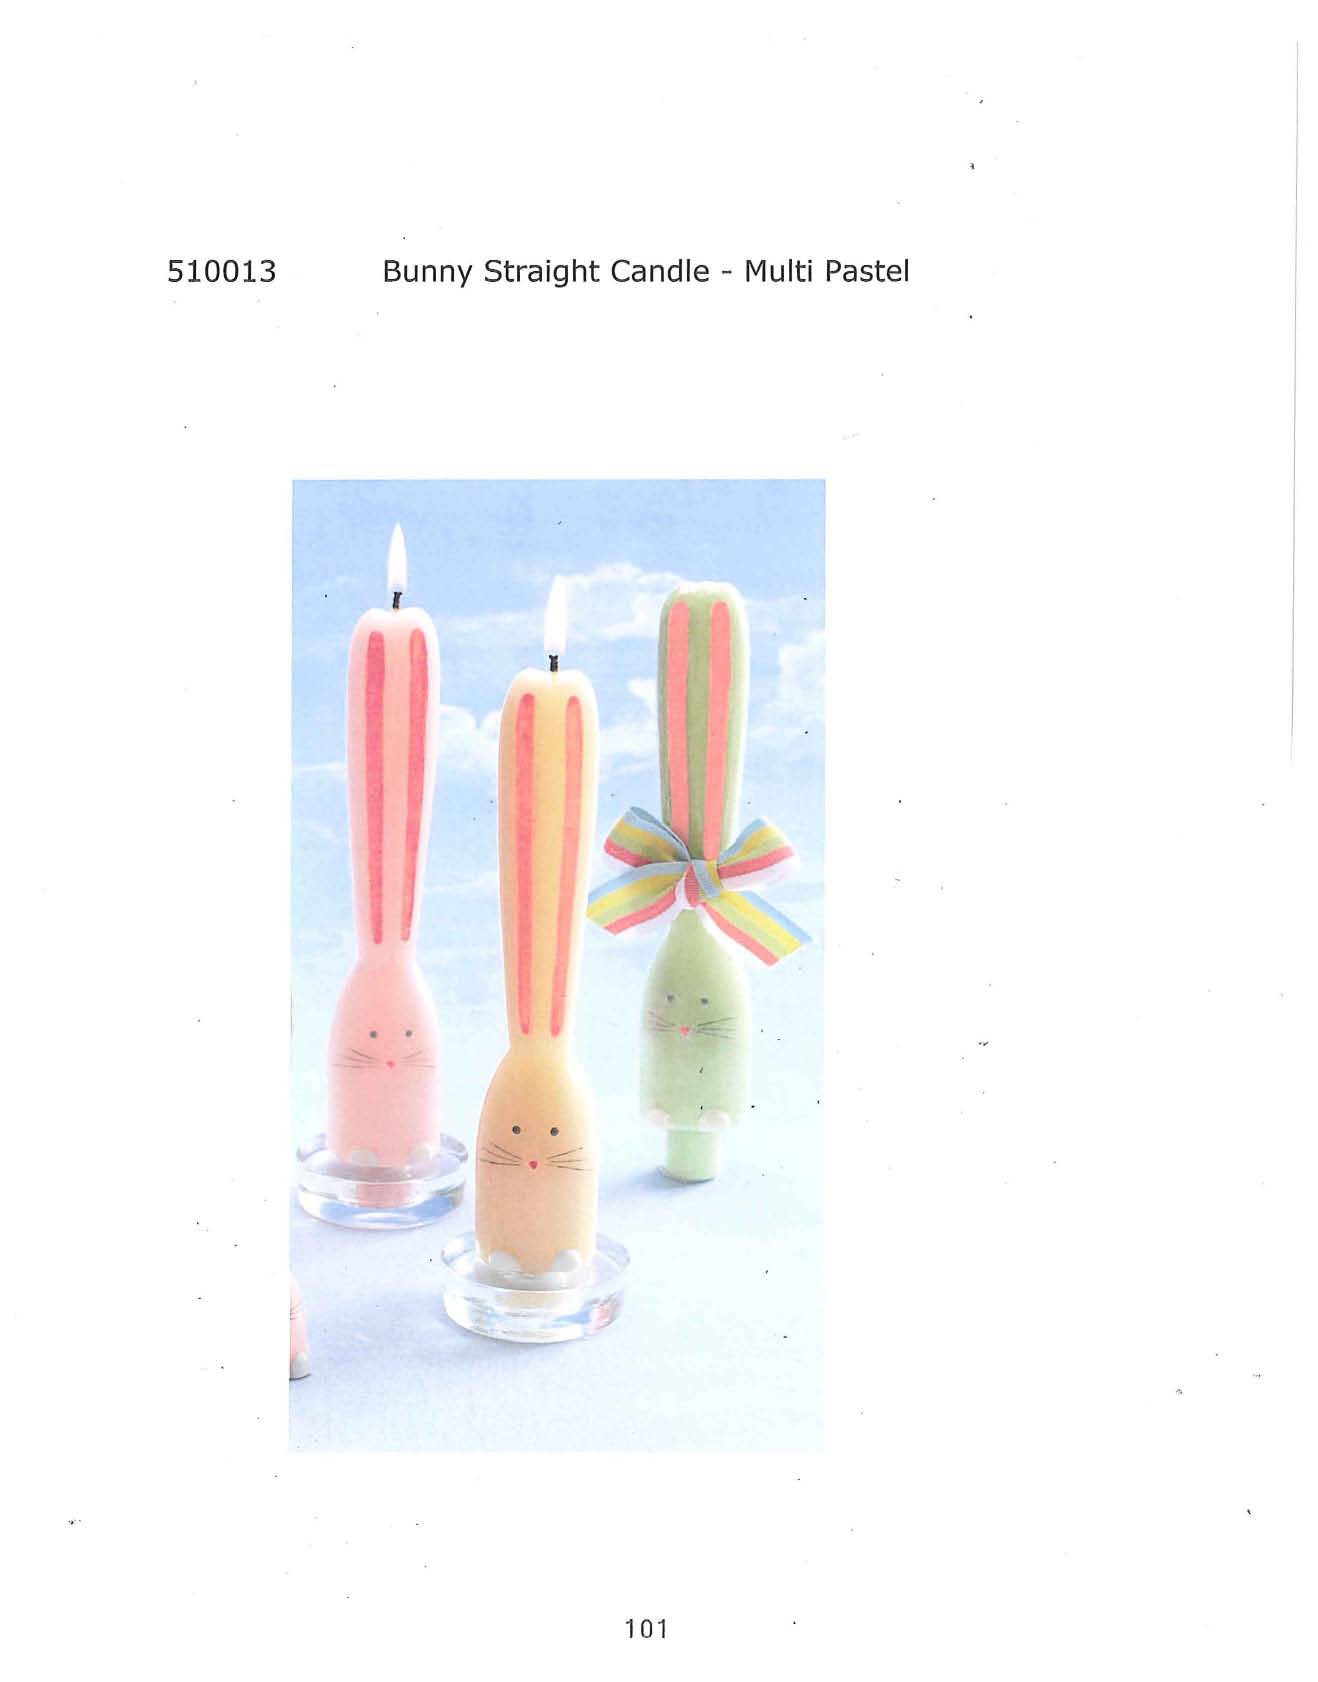 Bunny Straight Candle - Multi Pastel